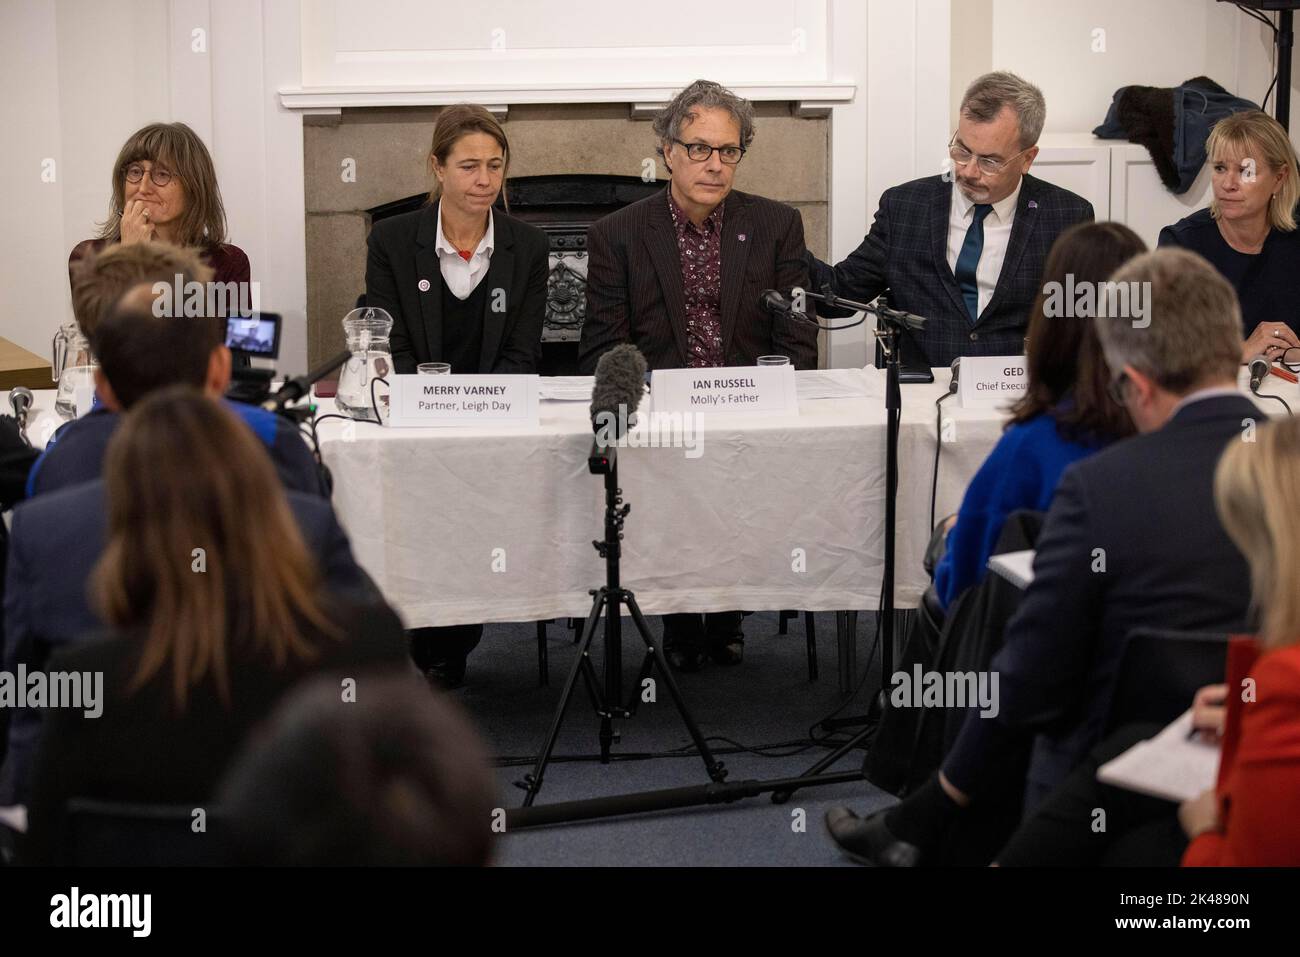 London, UK. 30th Sep, 2022. PHOTO:JEFF GILBERT 30th September 2022 Barnet, North London, UK Baroness Beeban Kidron (far left) alongside Ian Russell (Molly's father), speaking at a press conference on the final day of the Molly Russell inquest at North London Coronoer’s Court. Credit: Jeff Gilbert/Alamy Live News Stock Photo